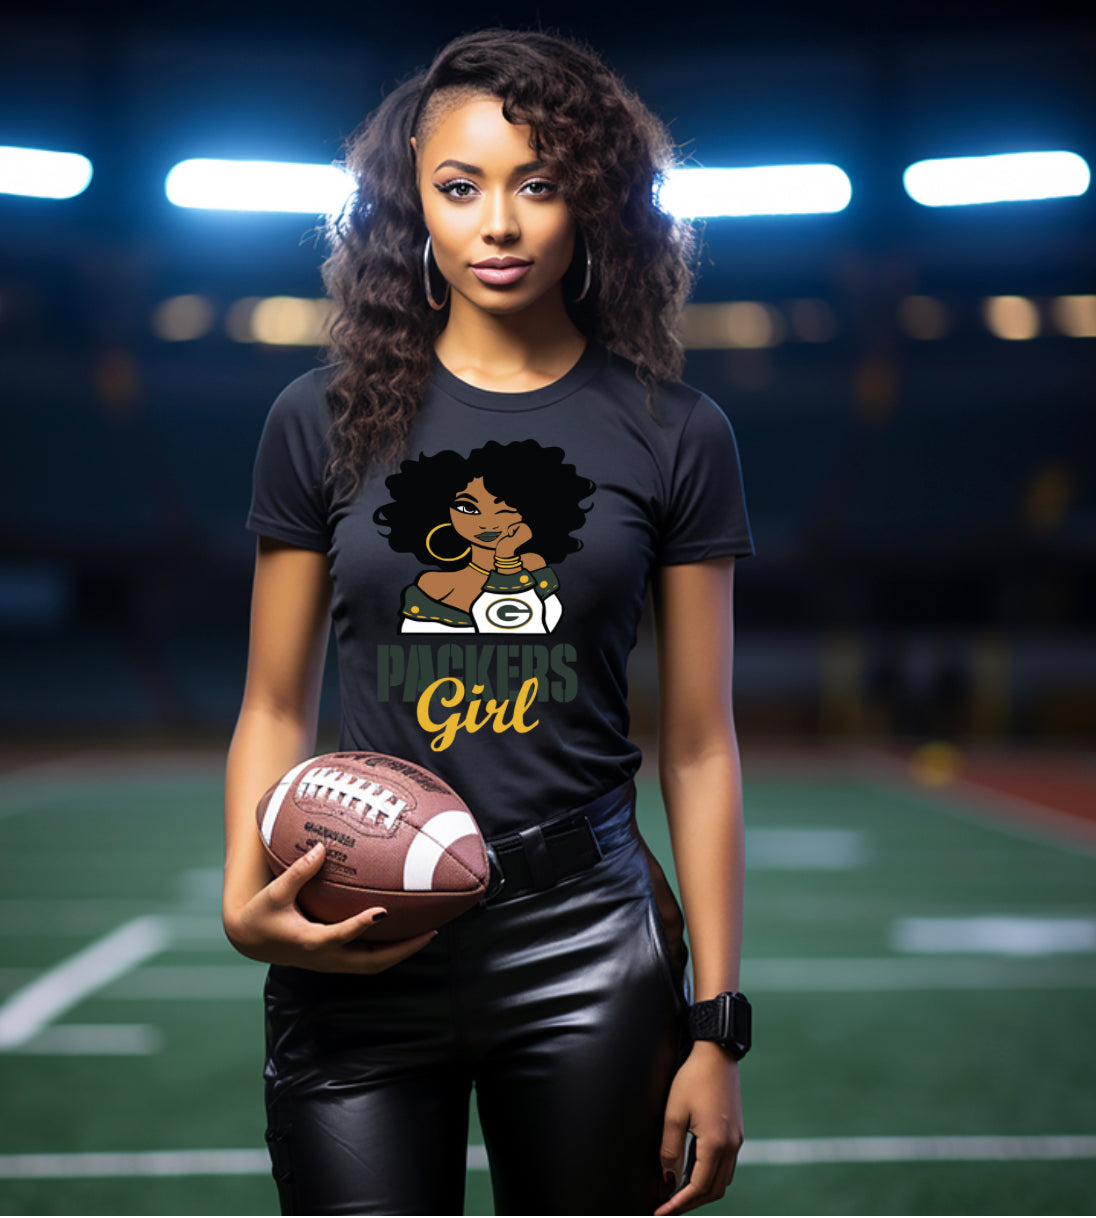 GB - Packers Girl